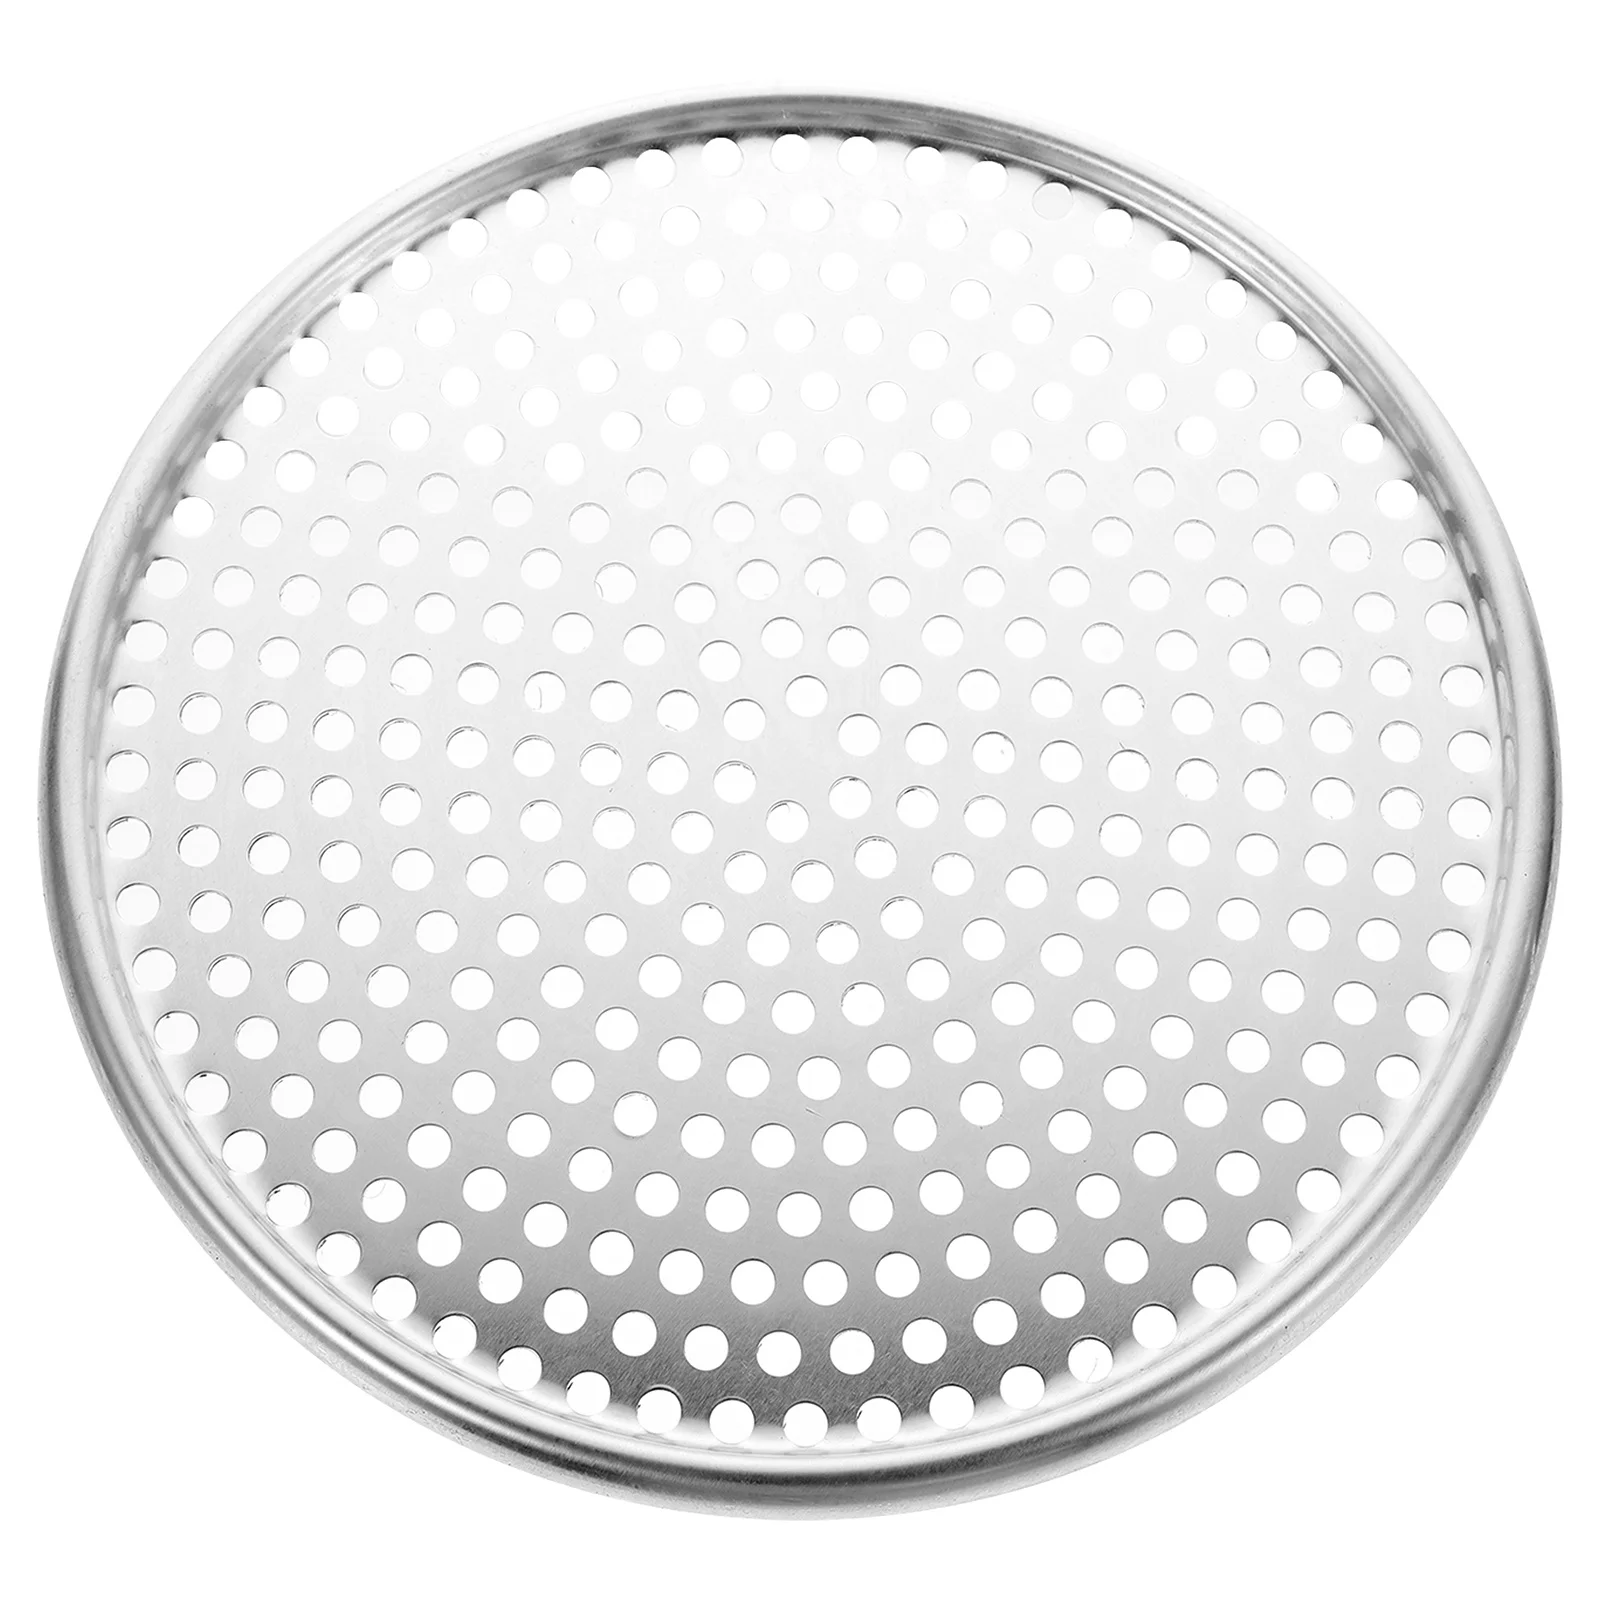 

Pizza Pan Baking Tray Pans Oven Plate Inch Stick Non Round Screen Sheet Bakeware Dish Bread Roasting Steel Holes Deep Net Pie